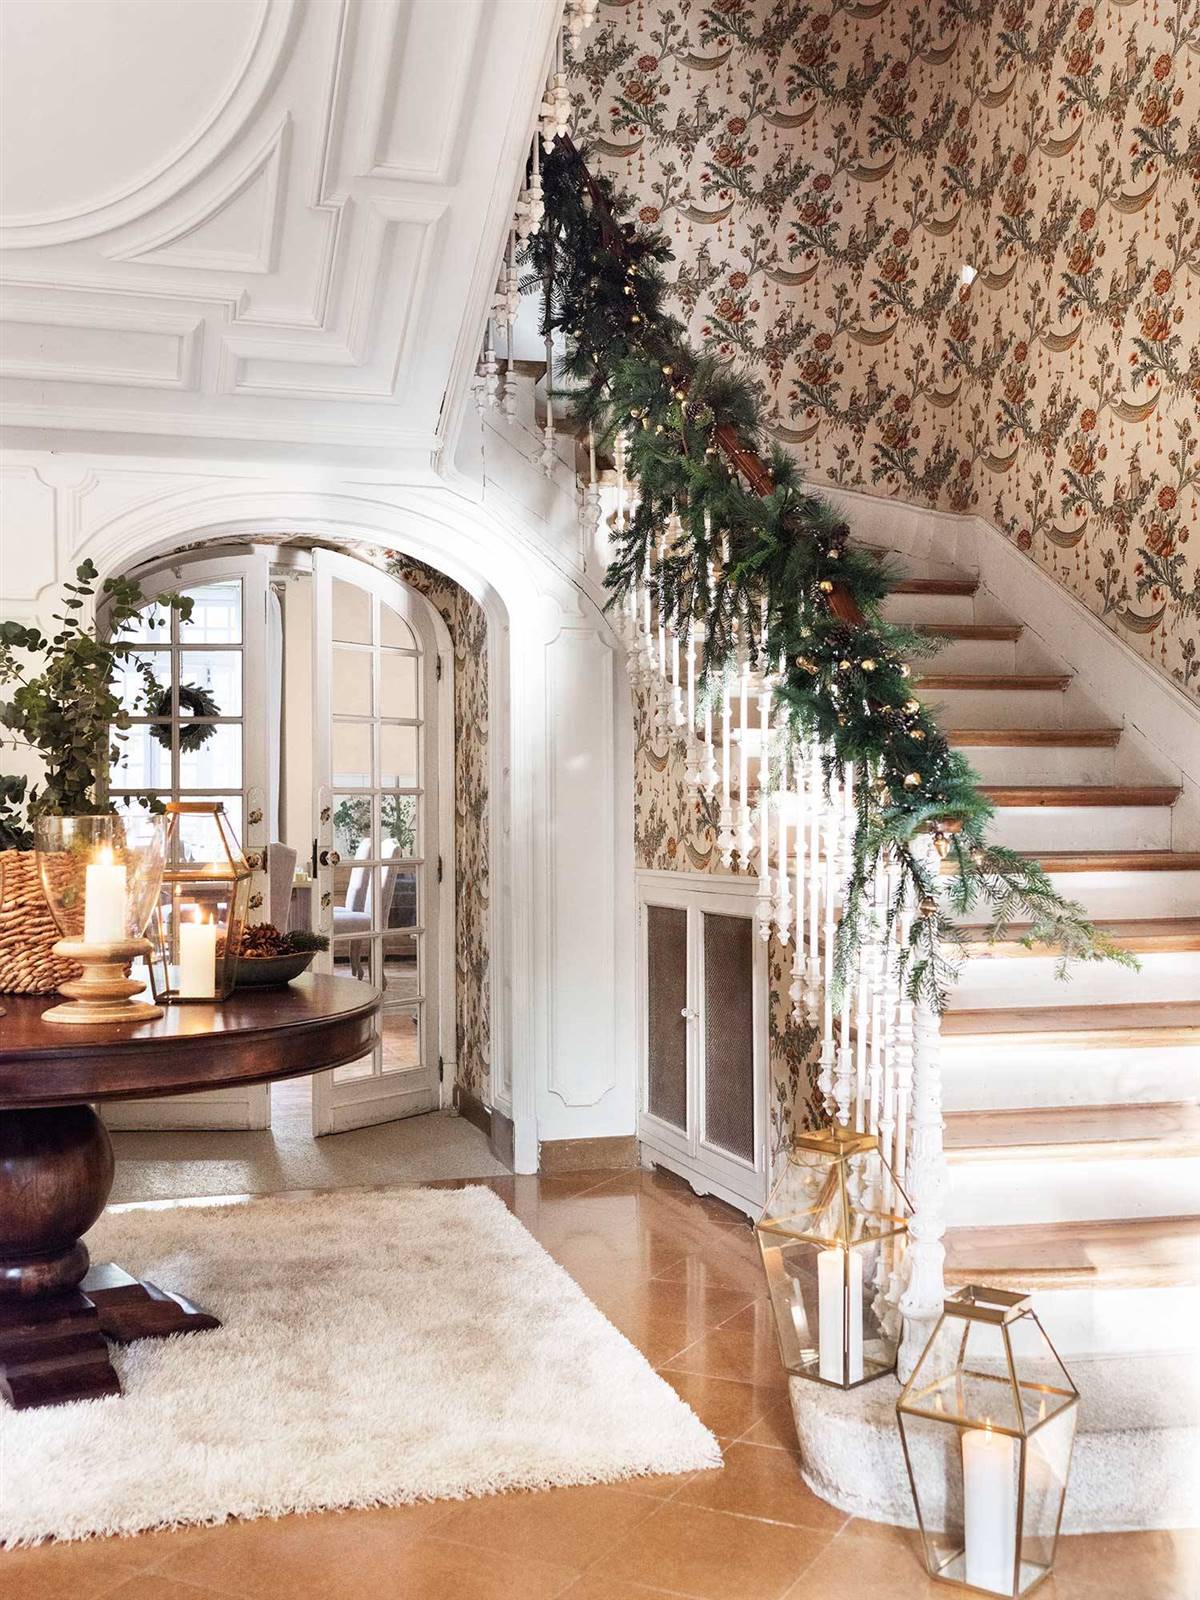 A CHRISTMAS GARLAND TO DRESS STAIRS